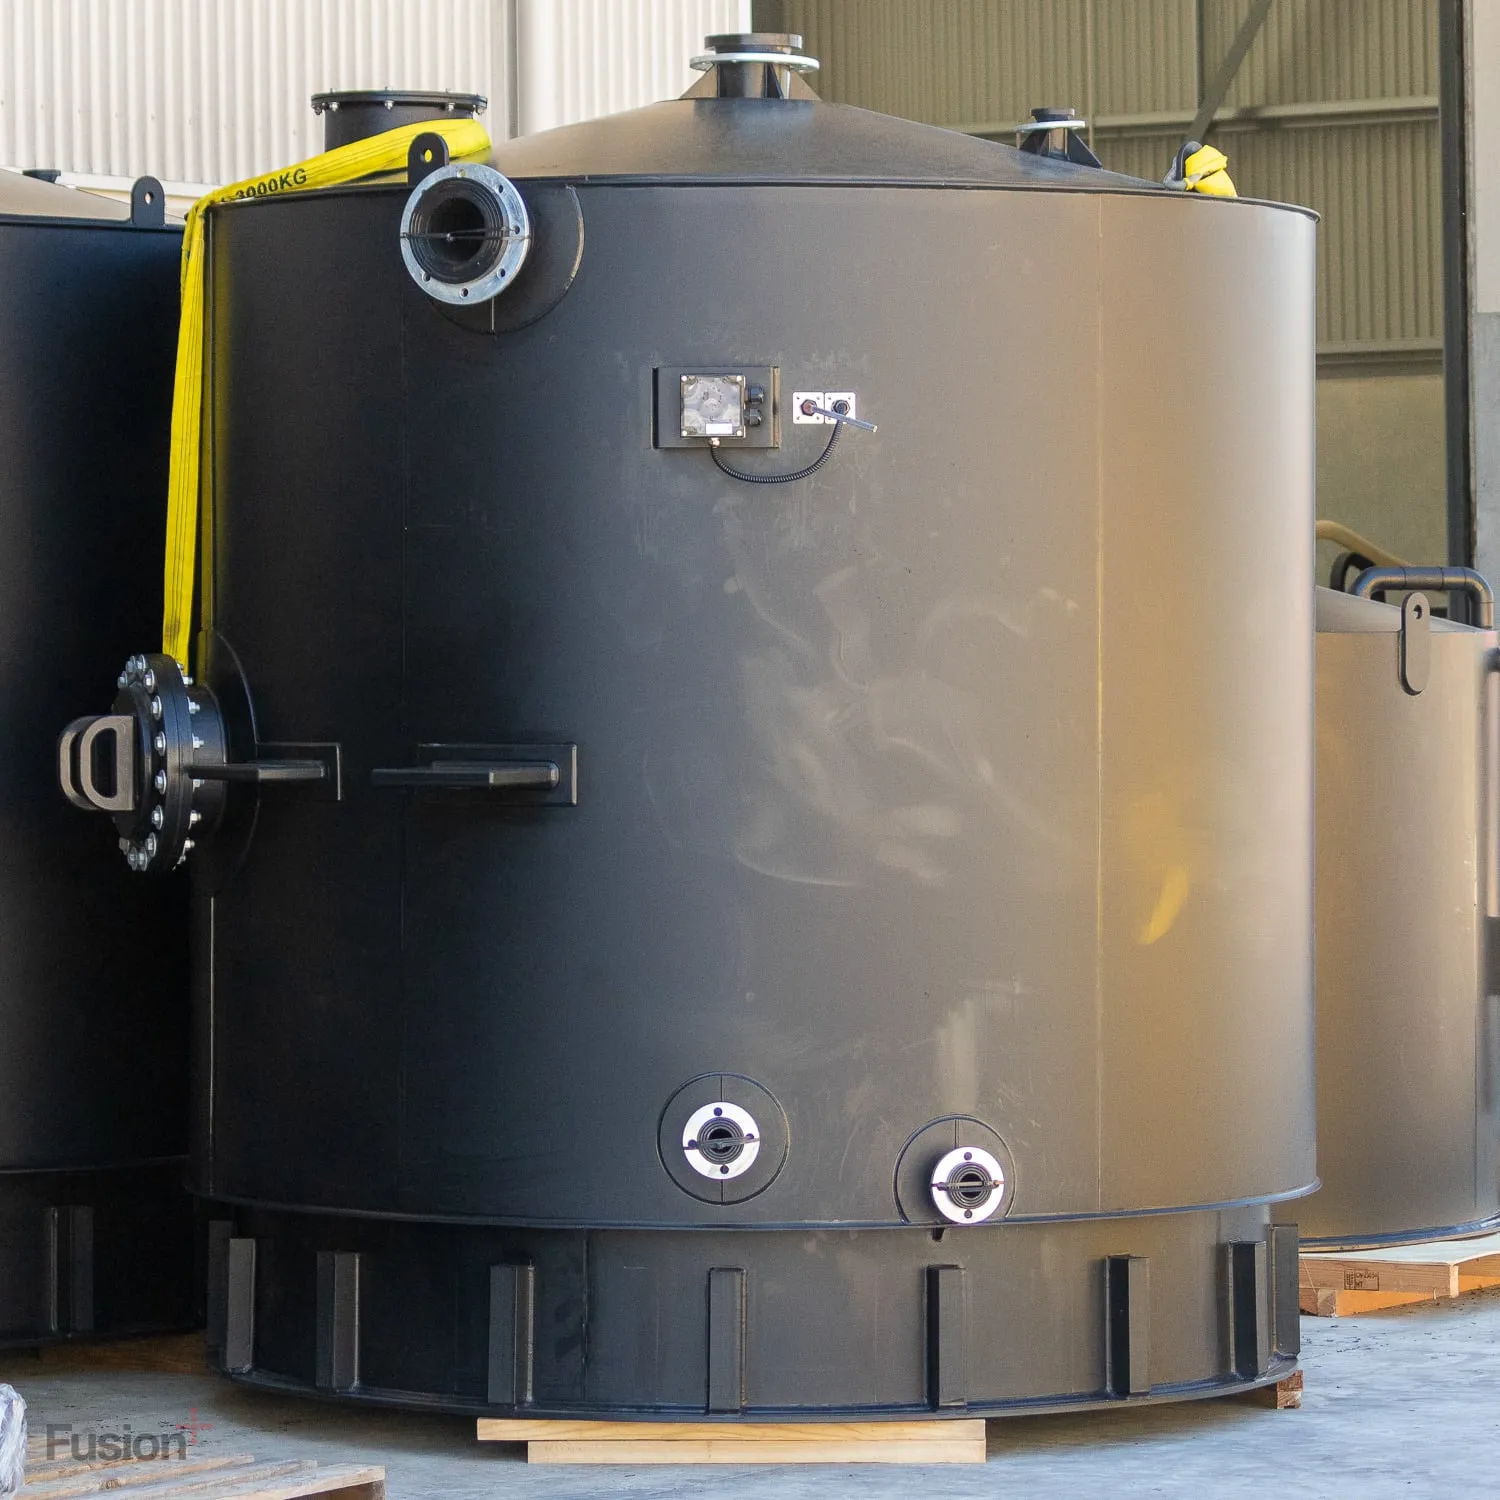 Insulated dual skin HDPE tank with internal heat tracer elements